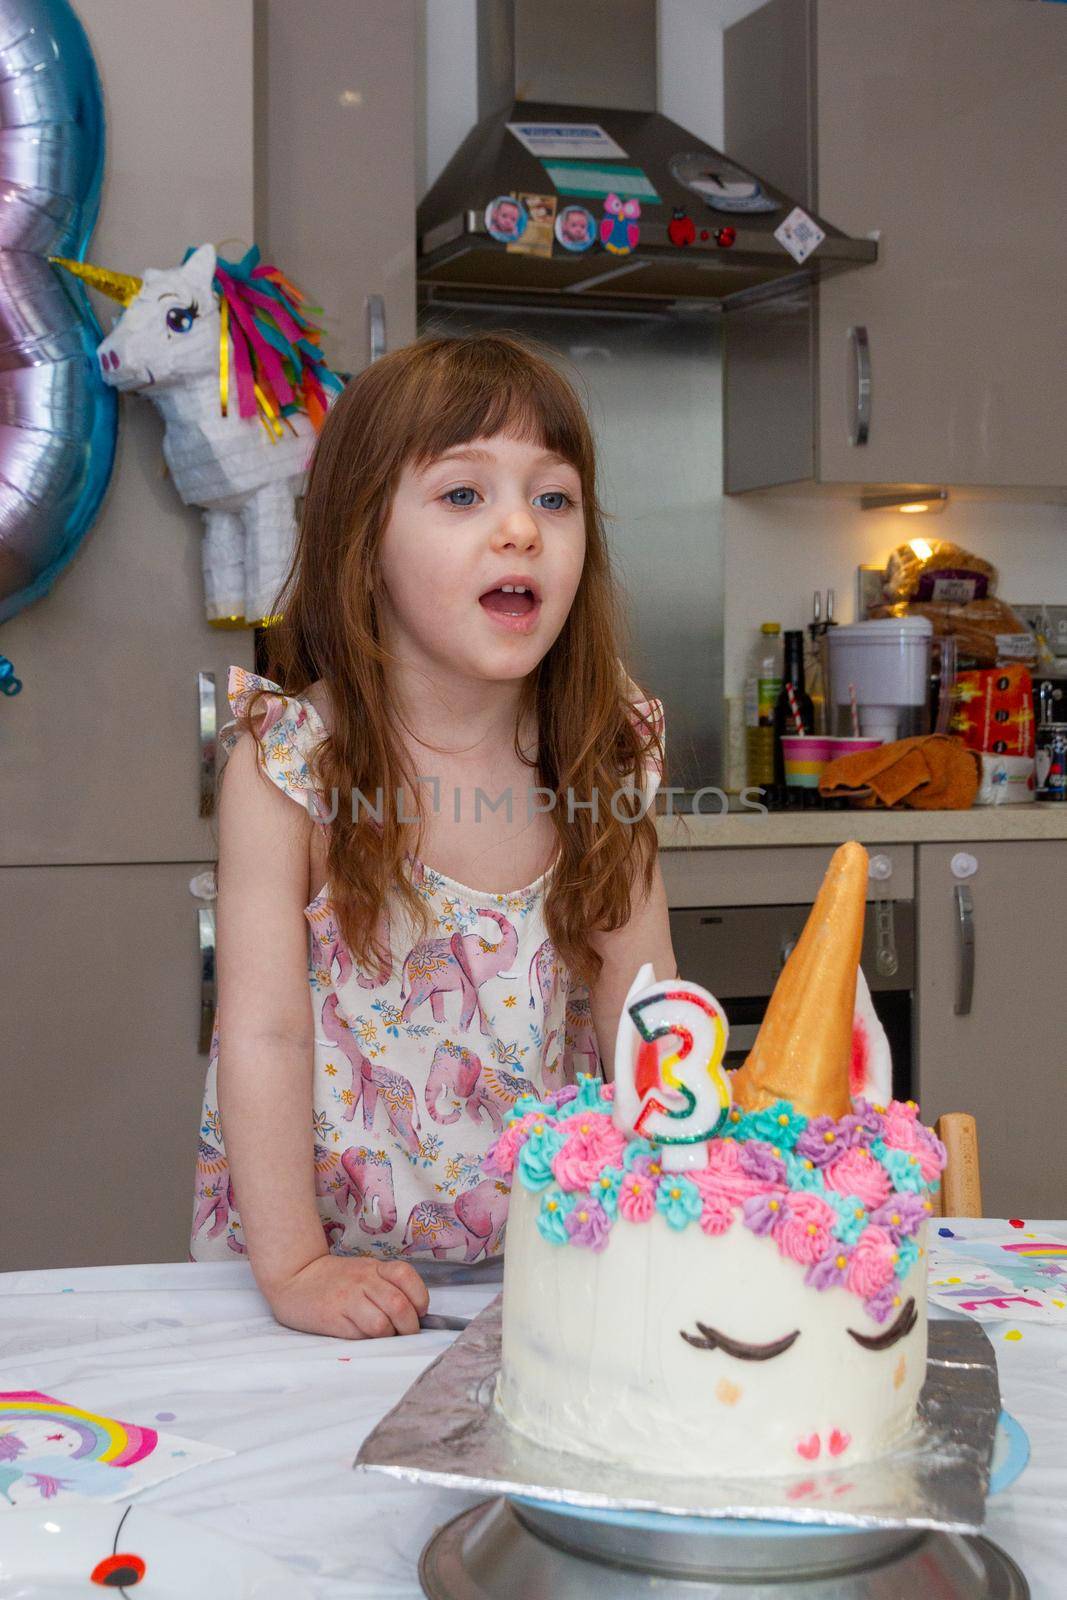 A Cute, brown-haired baby girl in a kitchen blowing candles of a birthday cake decorated as an unicorn with a number three candle with a pinhata in the background